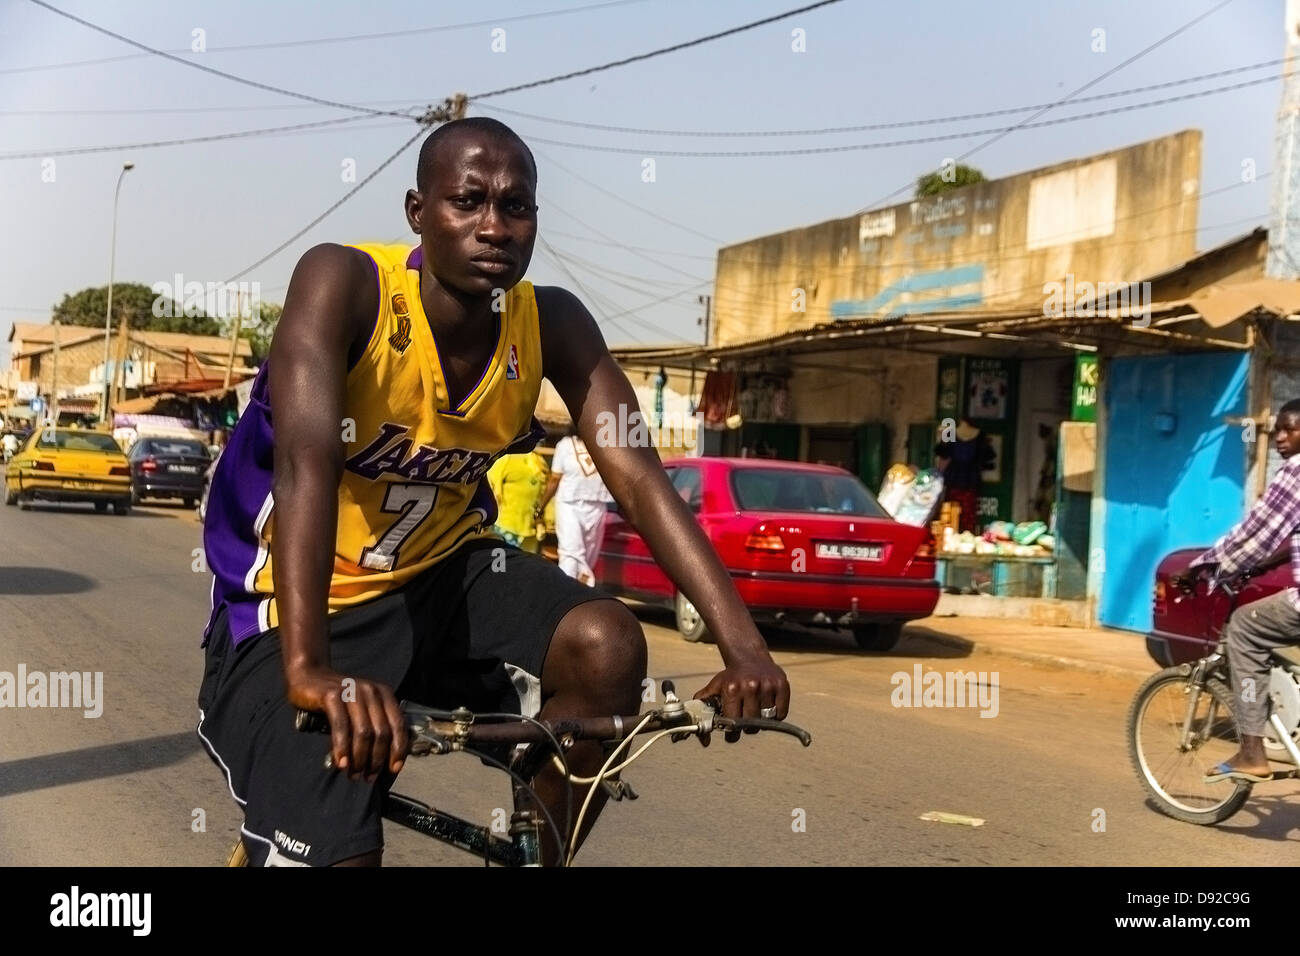 Cyclist with lakers t-shirt in on a street in Serrekunda, the Gambia Stock Photo